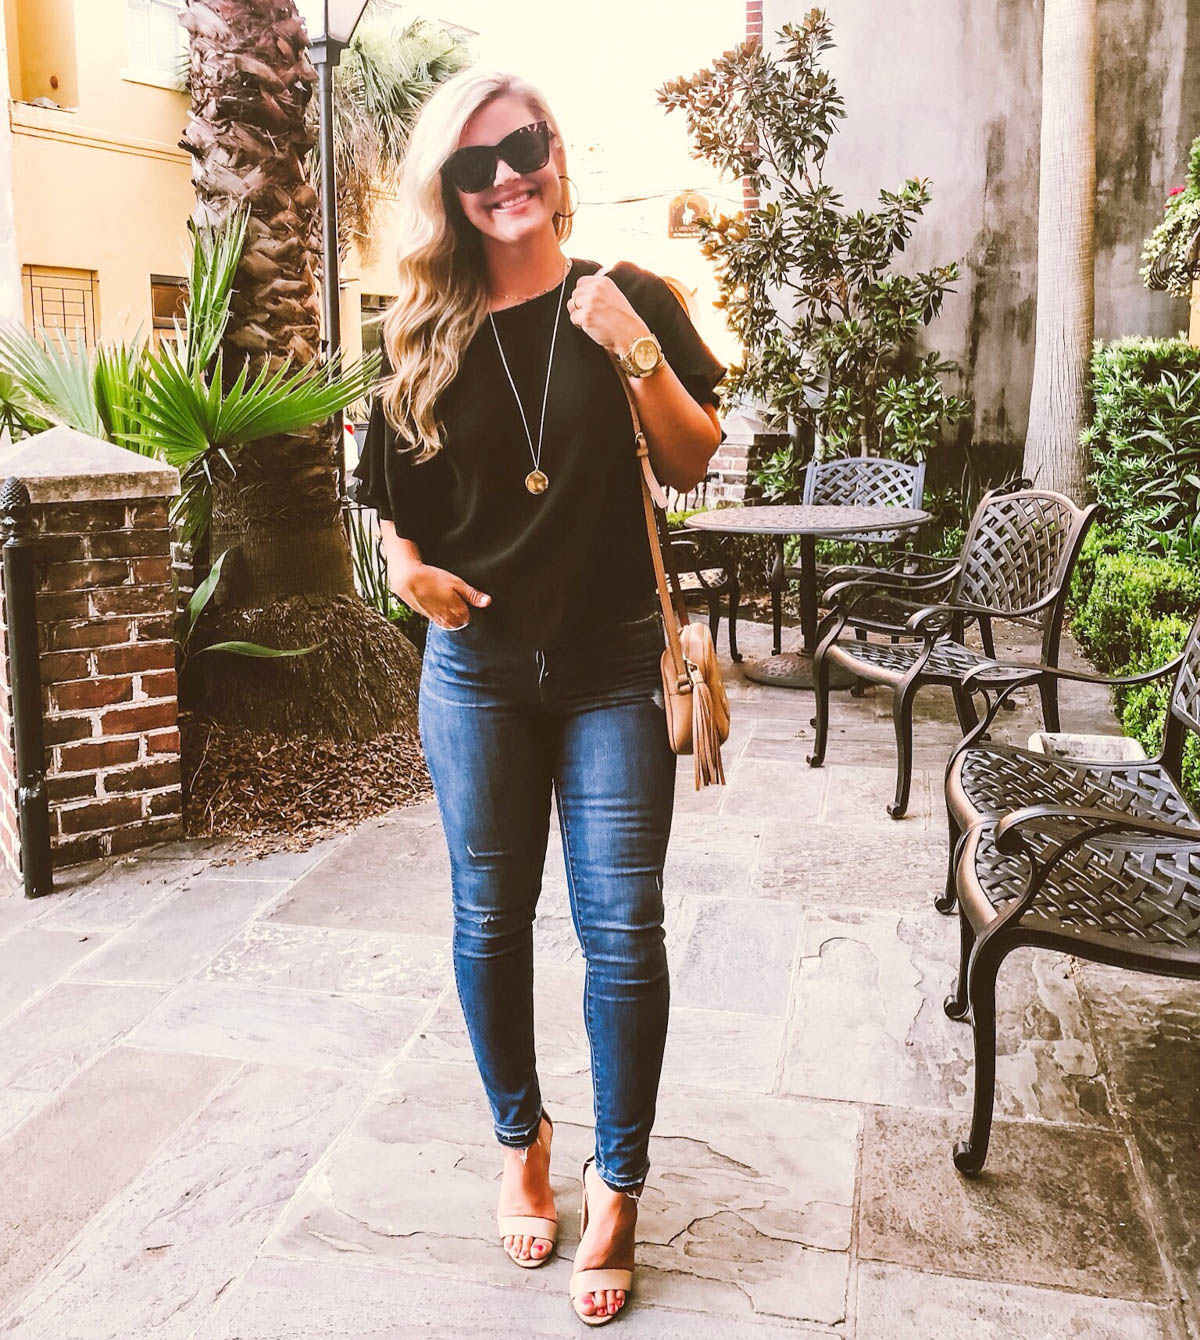 Casual outfit inspiration from style + beauty blogger Cristin Cooper, The Southern Style Guide